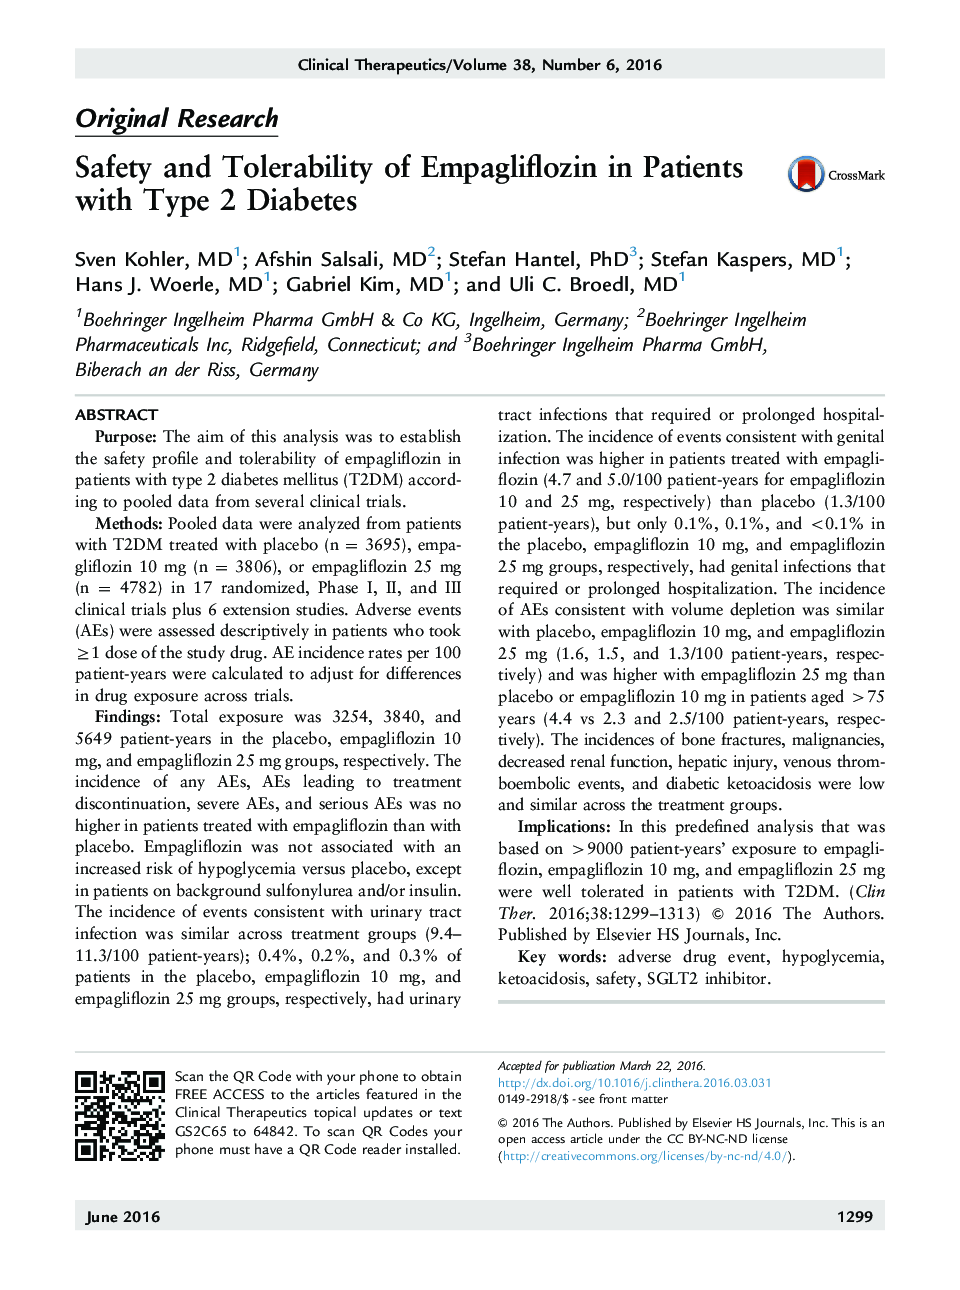 Original ResearchSafety and Tolerability of Empagliflozin in Patients with Type 2 Diabetes